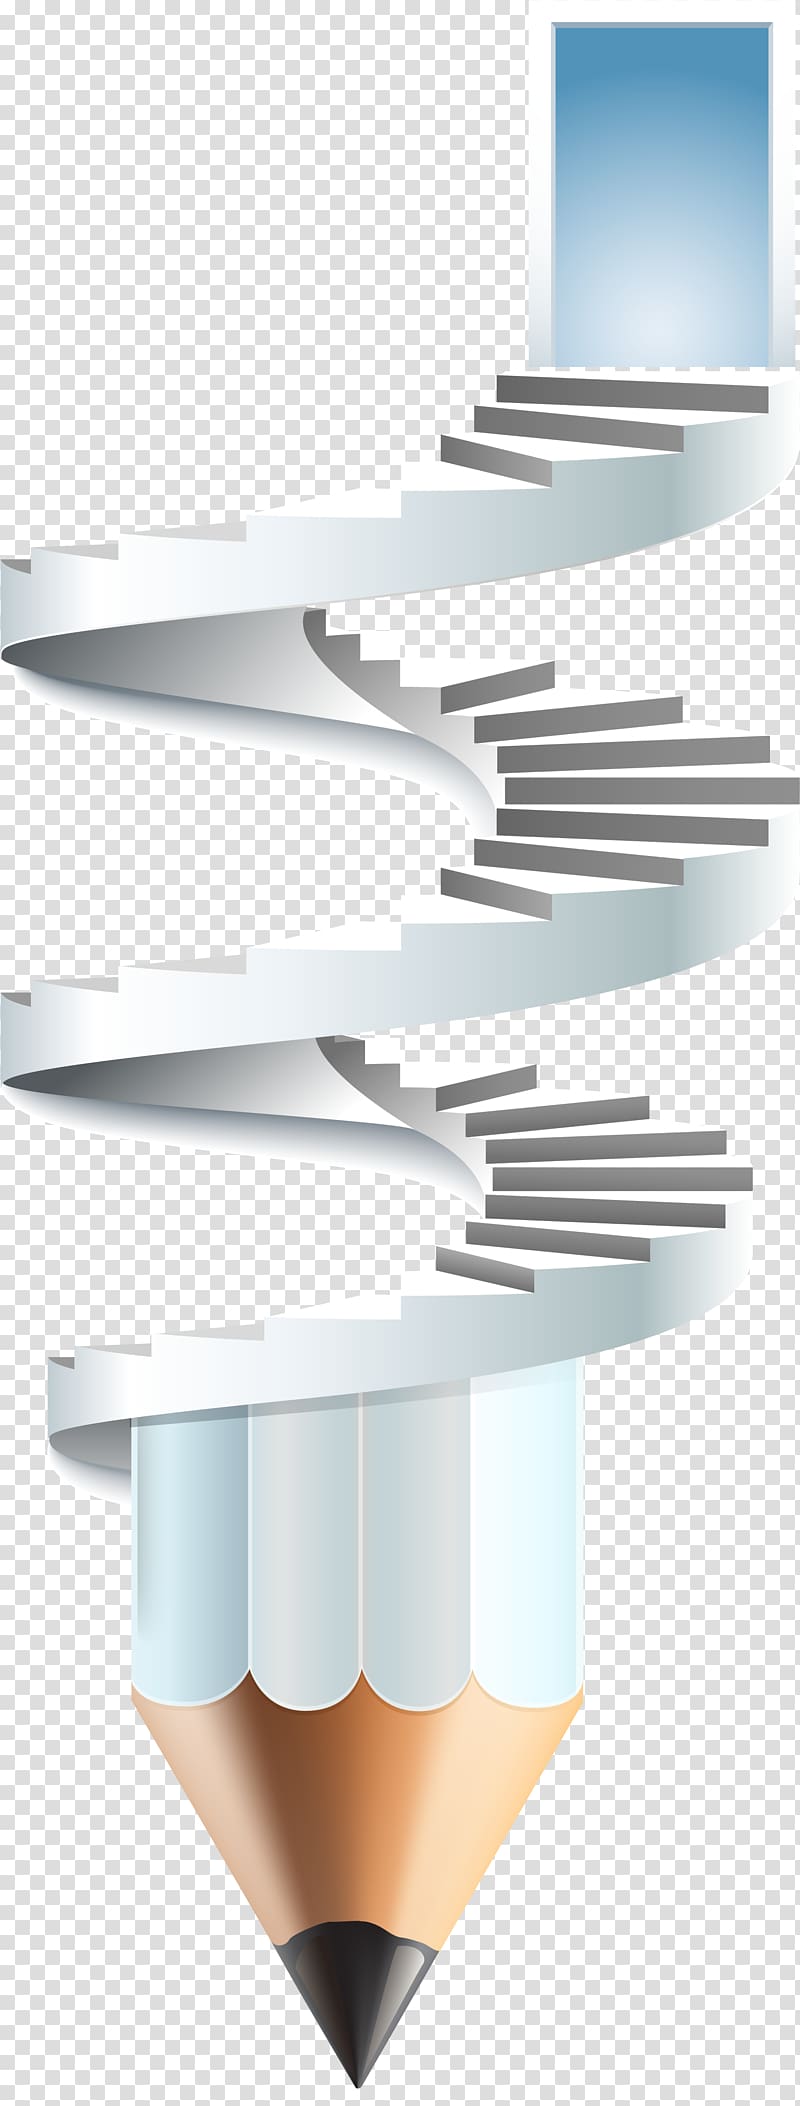 spiral staircase pencil illustration, Stairs Pencil Creativity, Creative pencil stairs transparent background PNG clipart